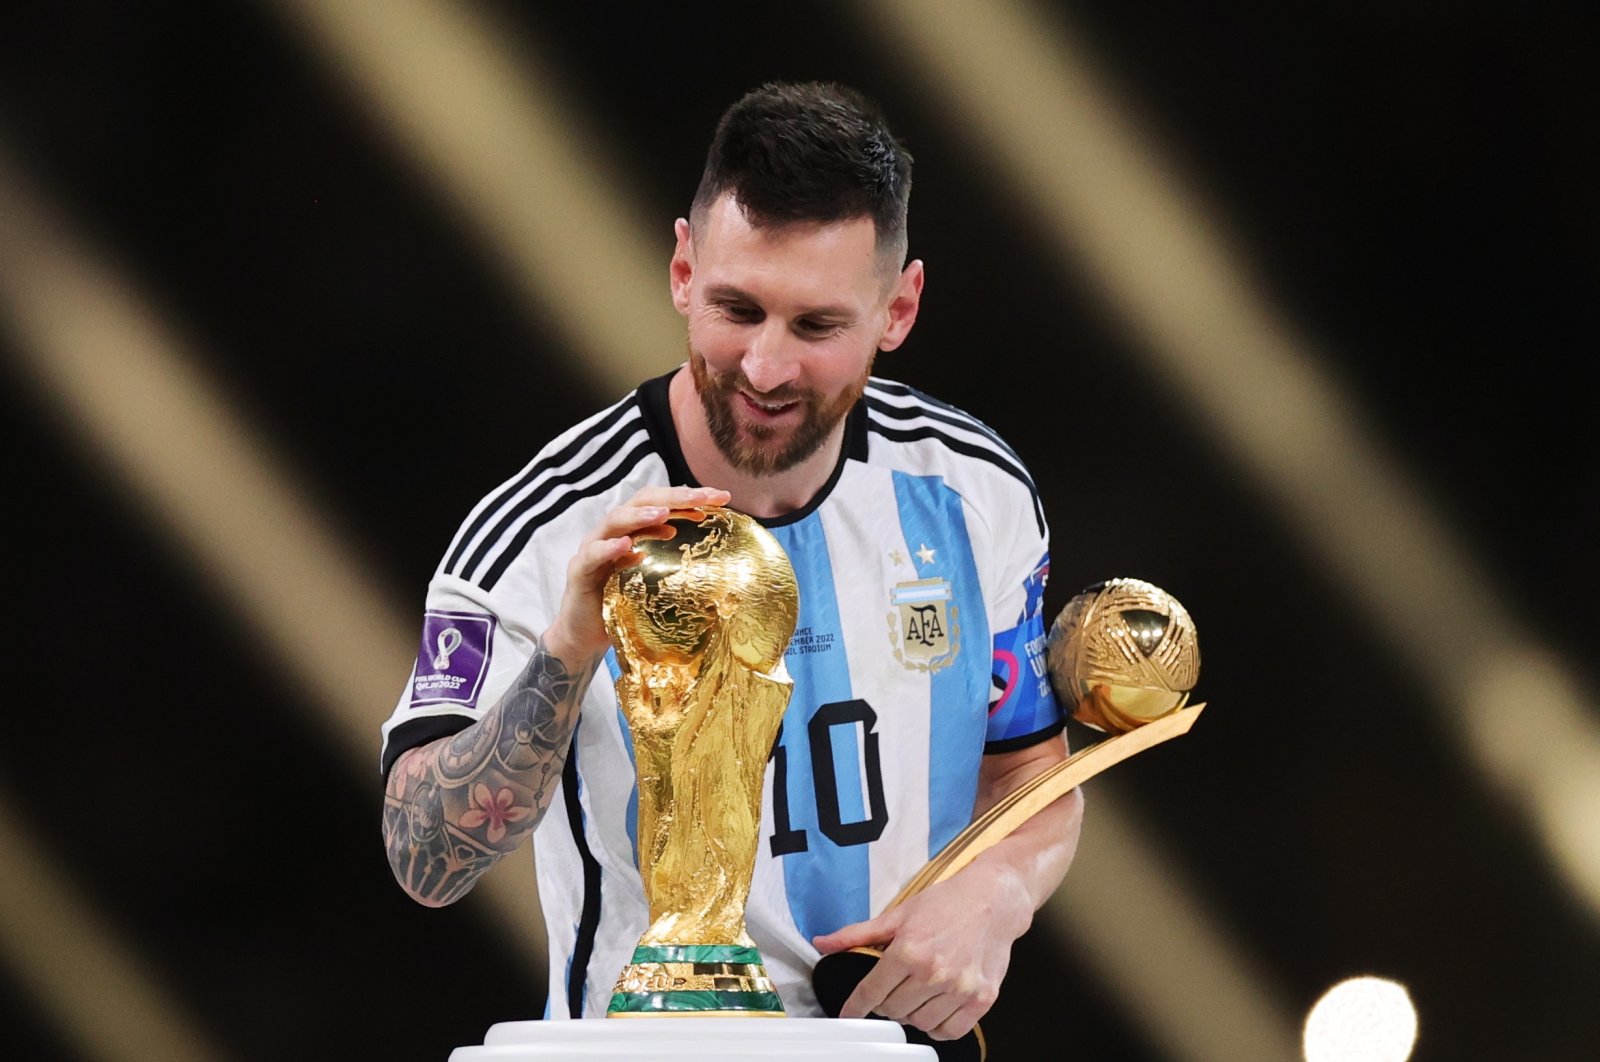 Lionel Messi of Argentina touches the World Cup trophy as he passes it after winning the golden ball award during the awards ceremony after the FIFA World Cup 2022 final between Argentina and France at Lusail stadium, Lusail, Qatar, Dec. 18 2022. (EPA Photo)